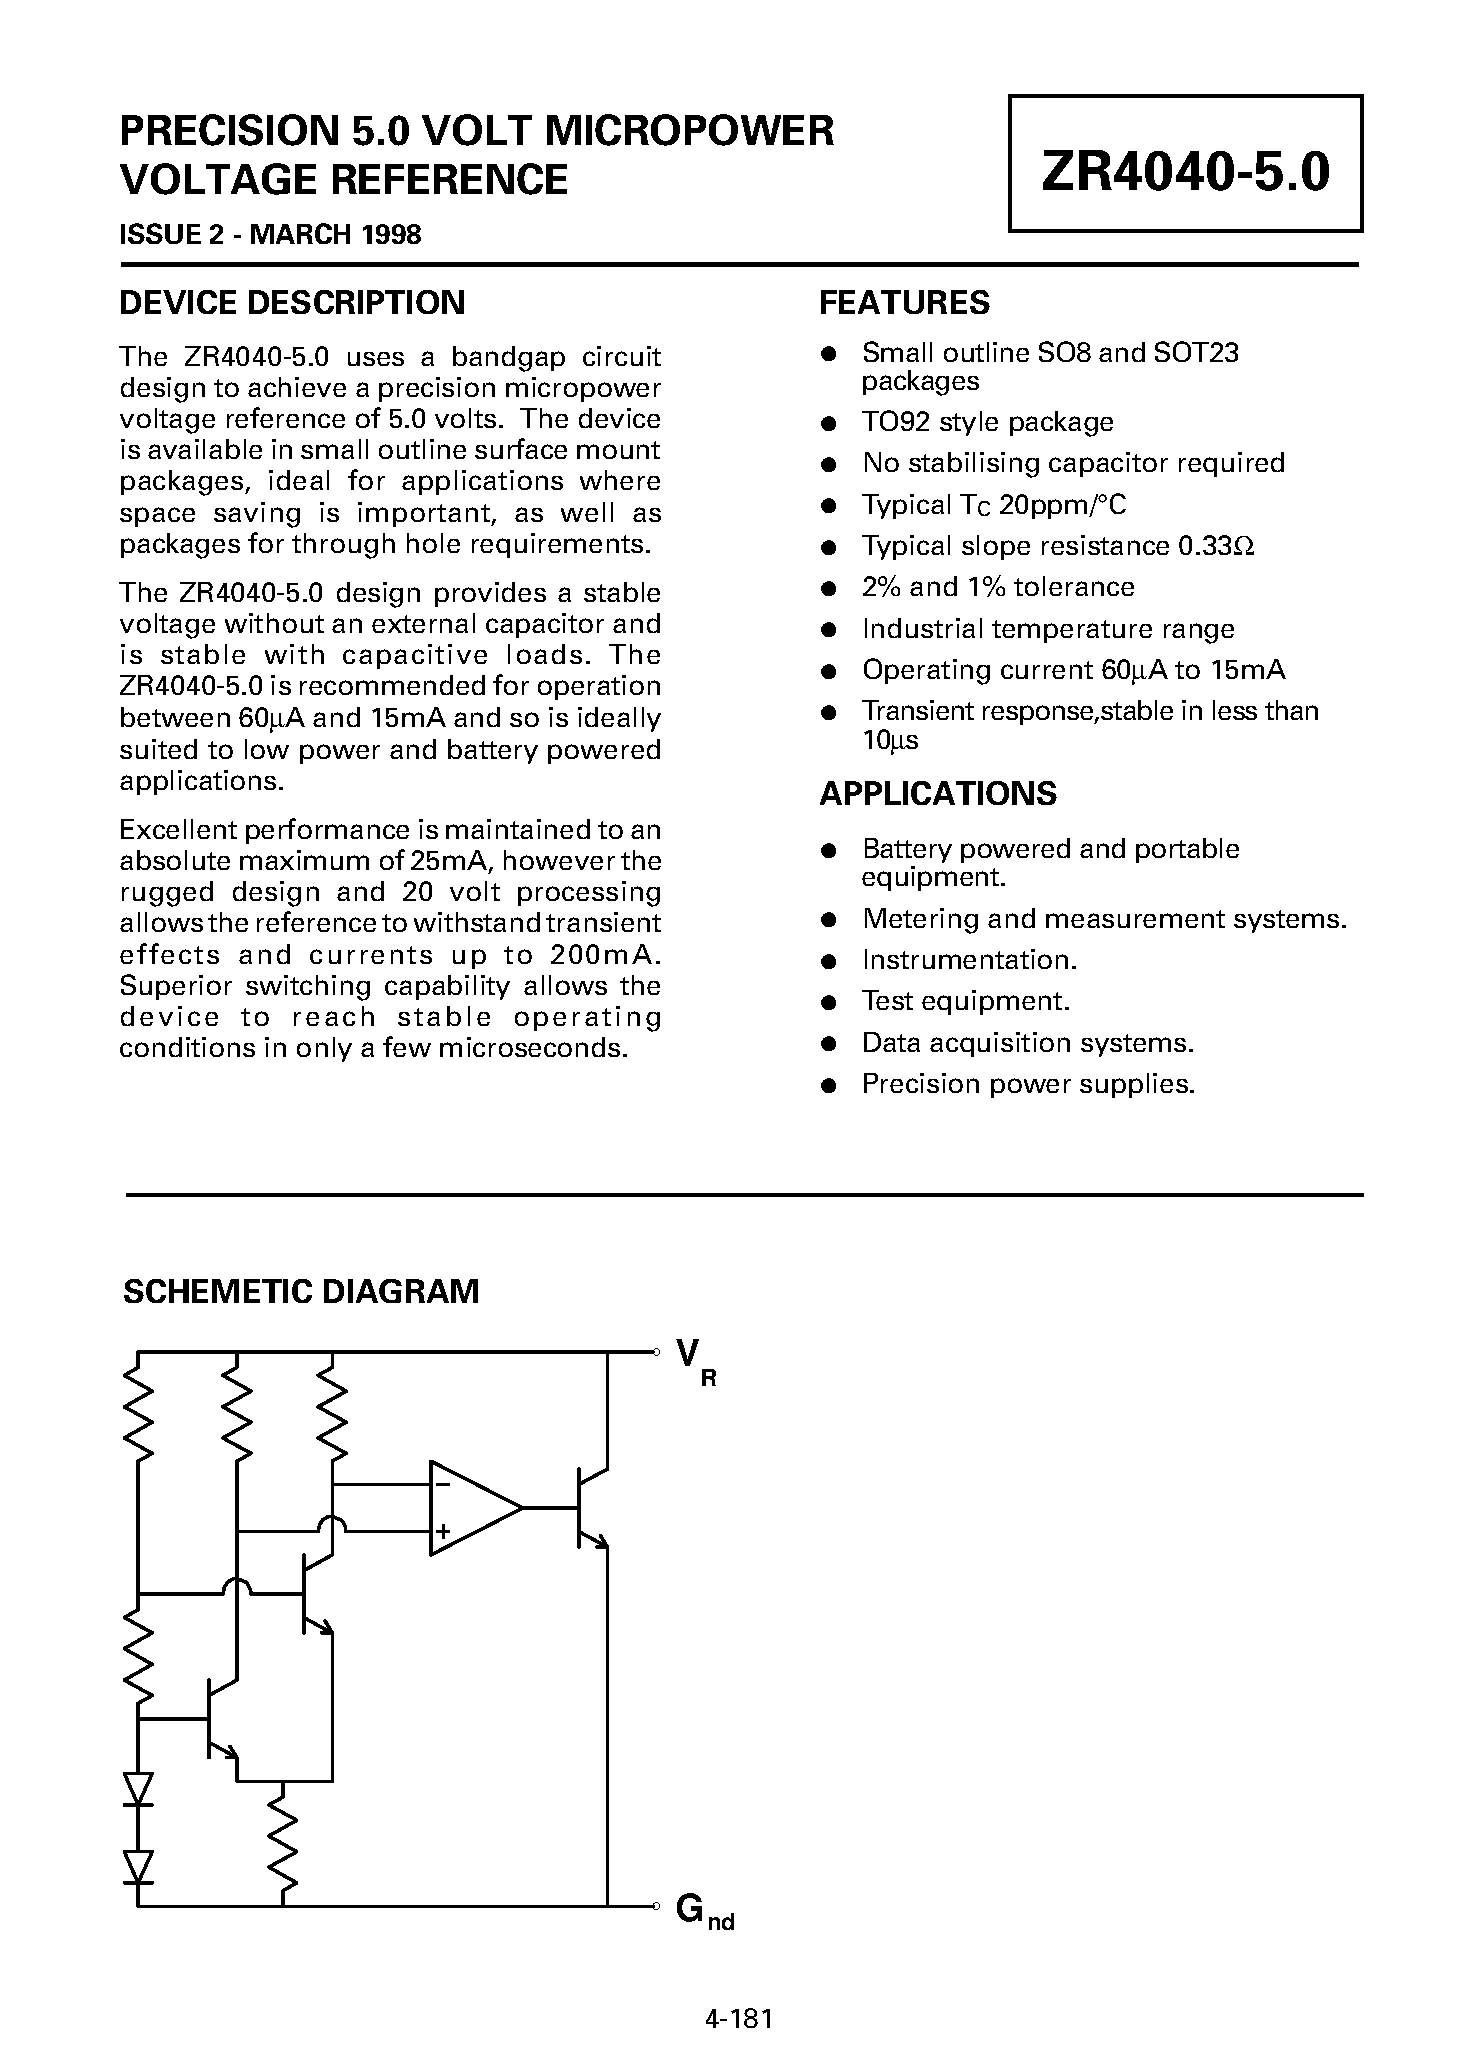 Datasheet ZR40402F50 - PRECISION 5.0 VOLT MICROPOWER VOLTAGE REFERENCE page 1